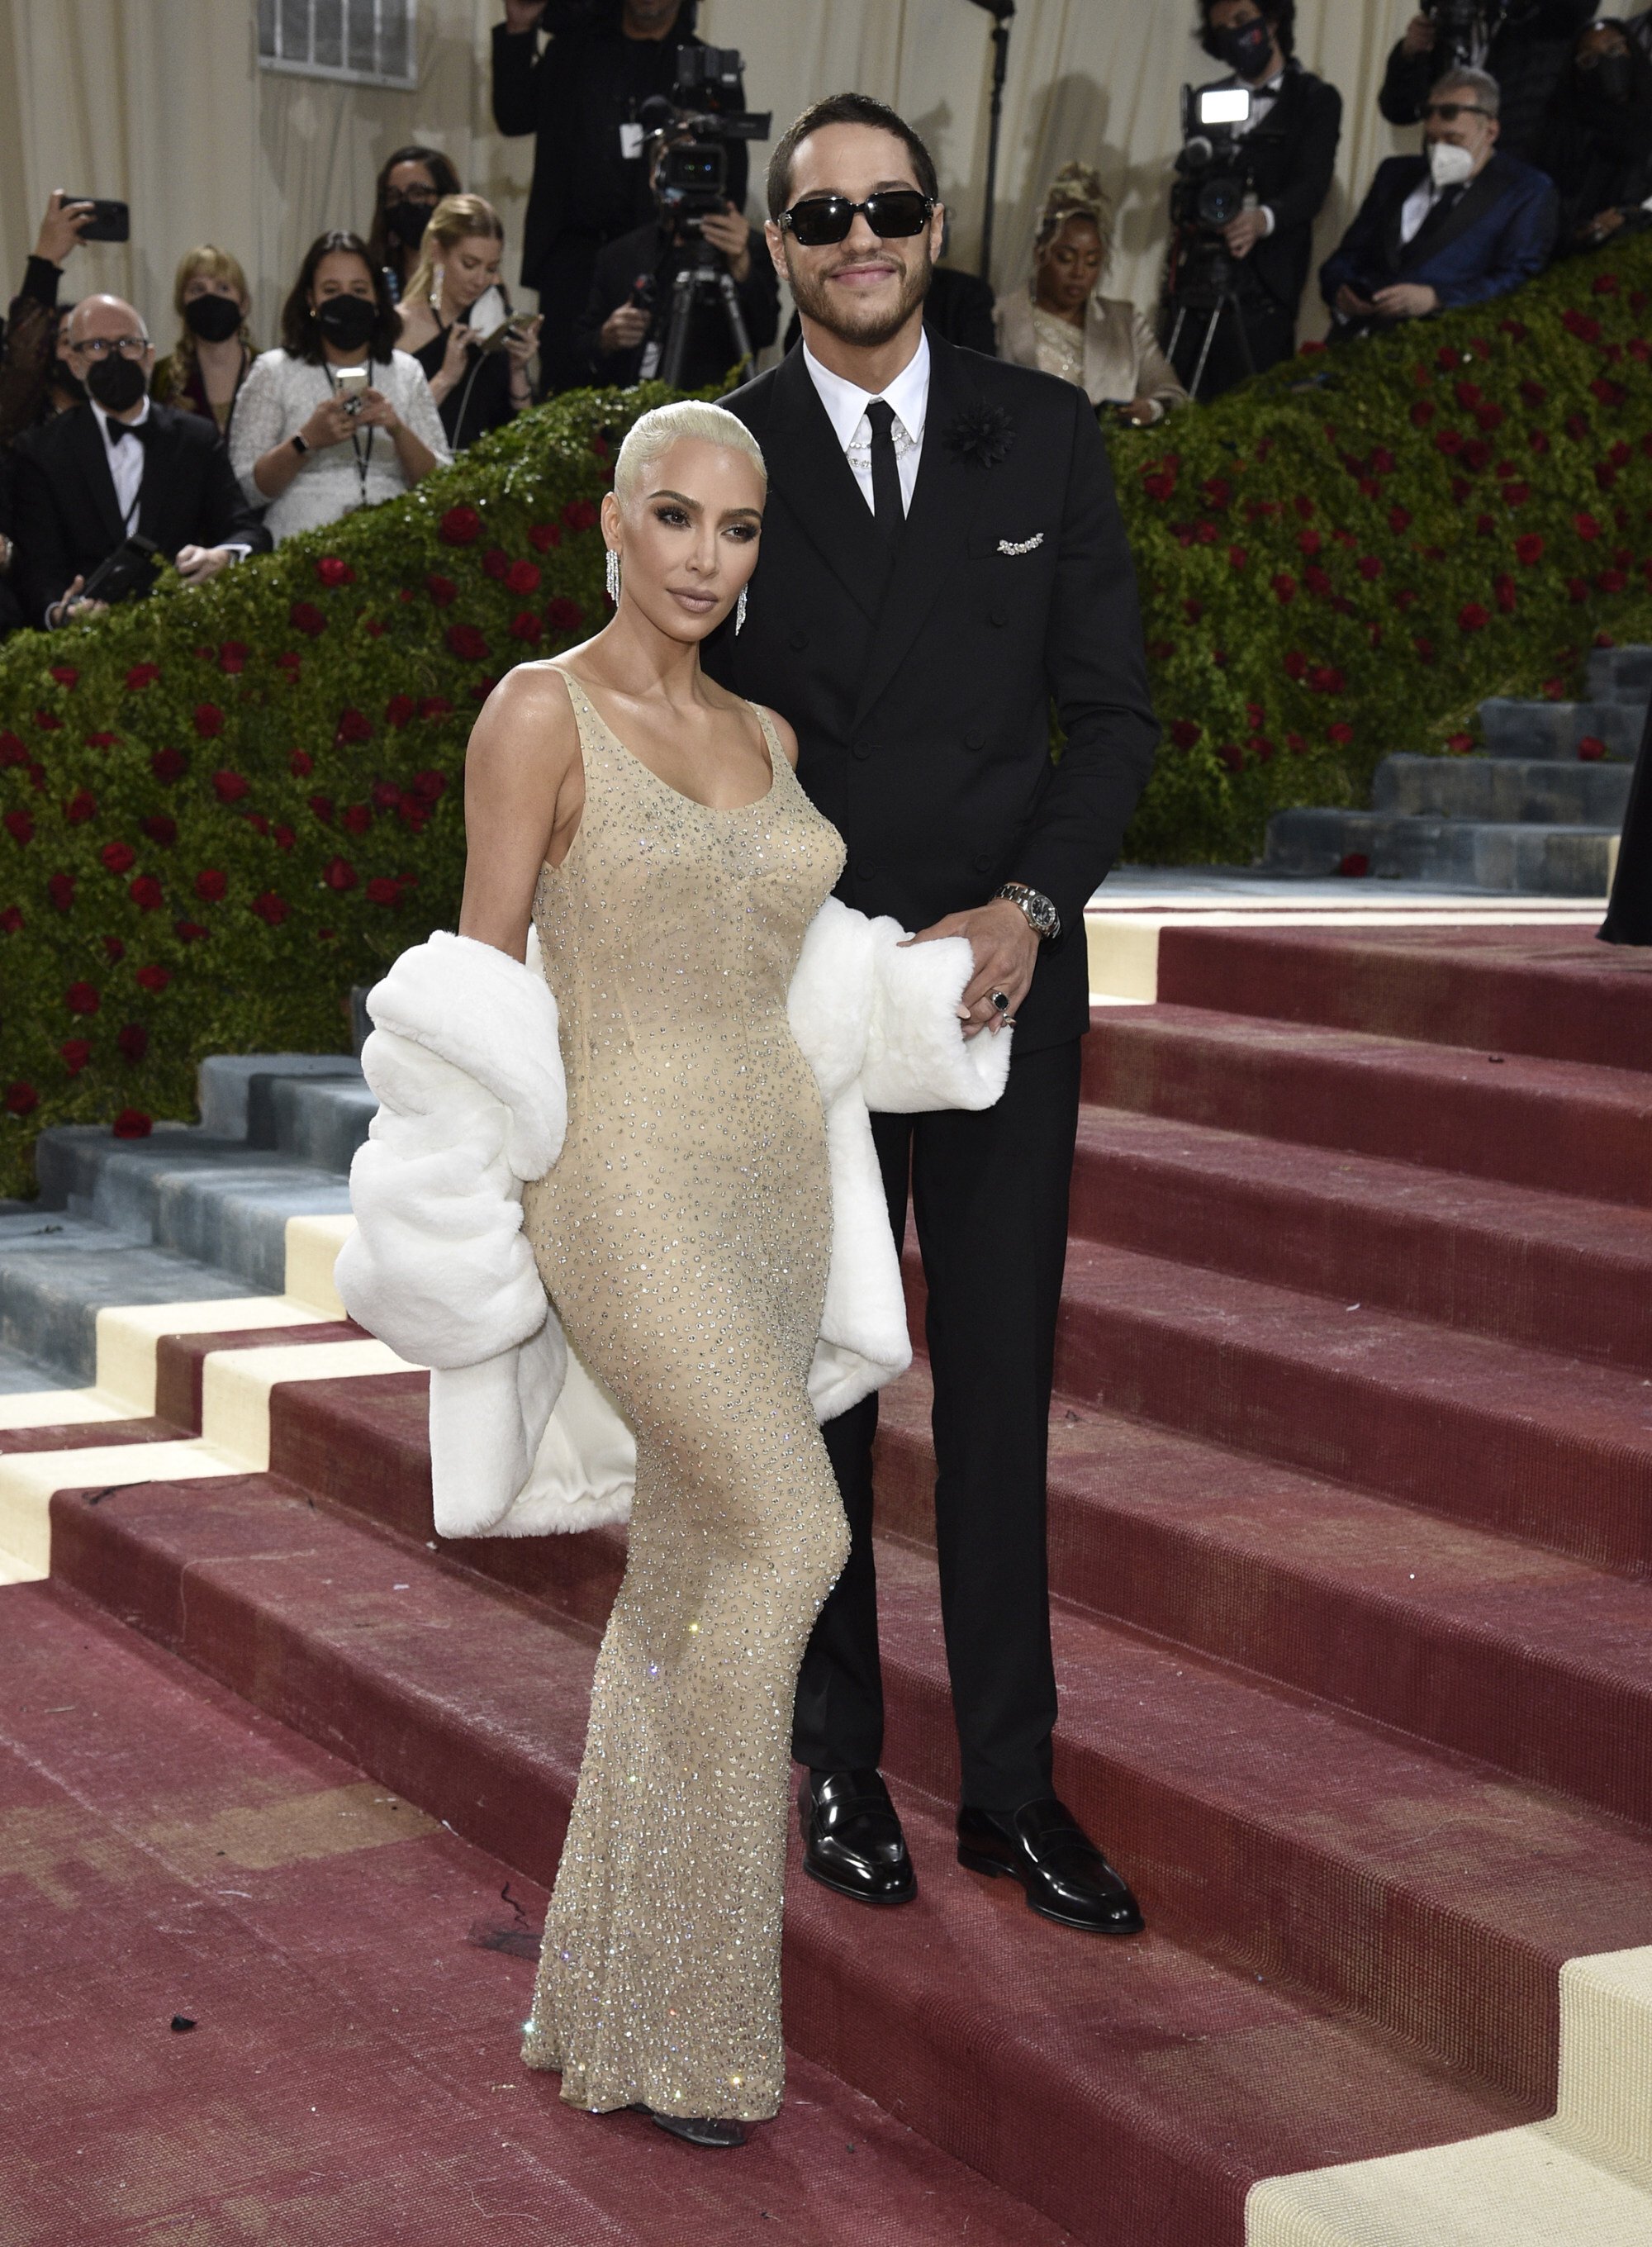 For The Met Gala 2022, Kim Kardashian wore the iconic shimmering gold dress from Marilyn Monroe’s 1962 performance for former US president John F. Kennedy. Photo: AP